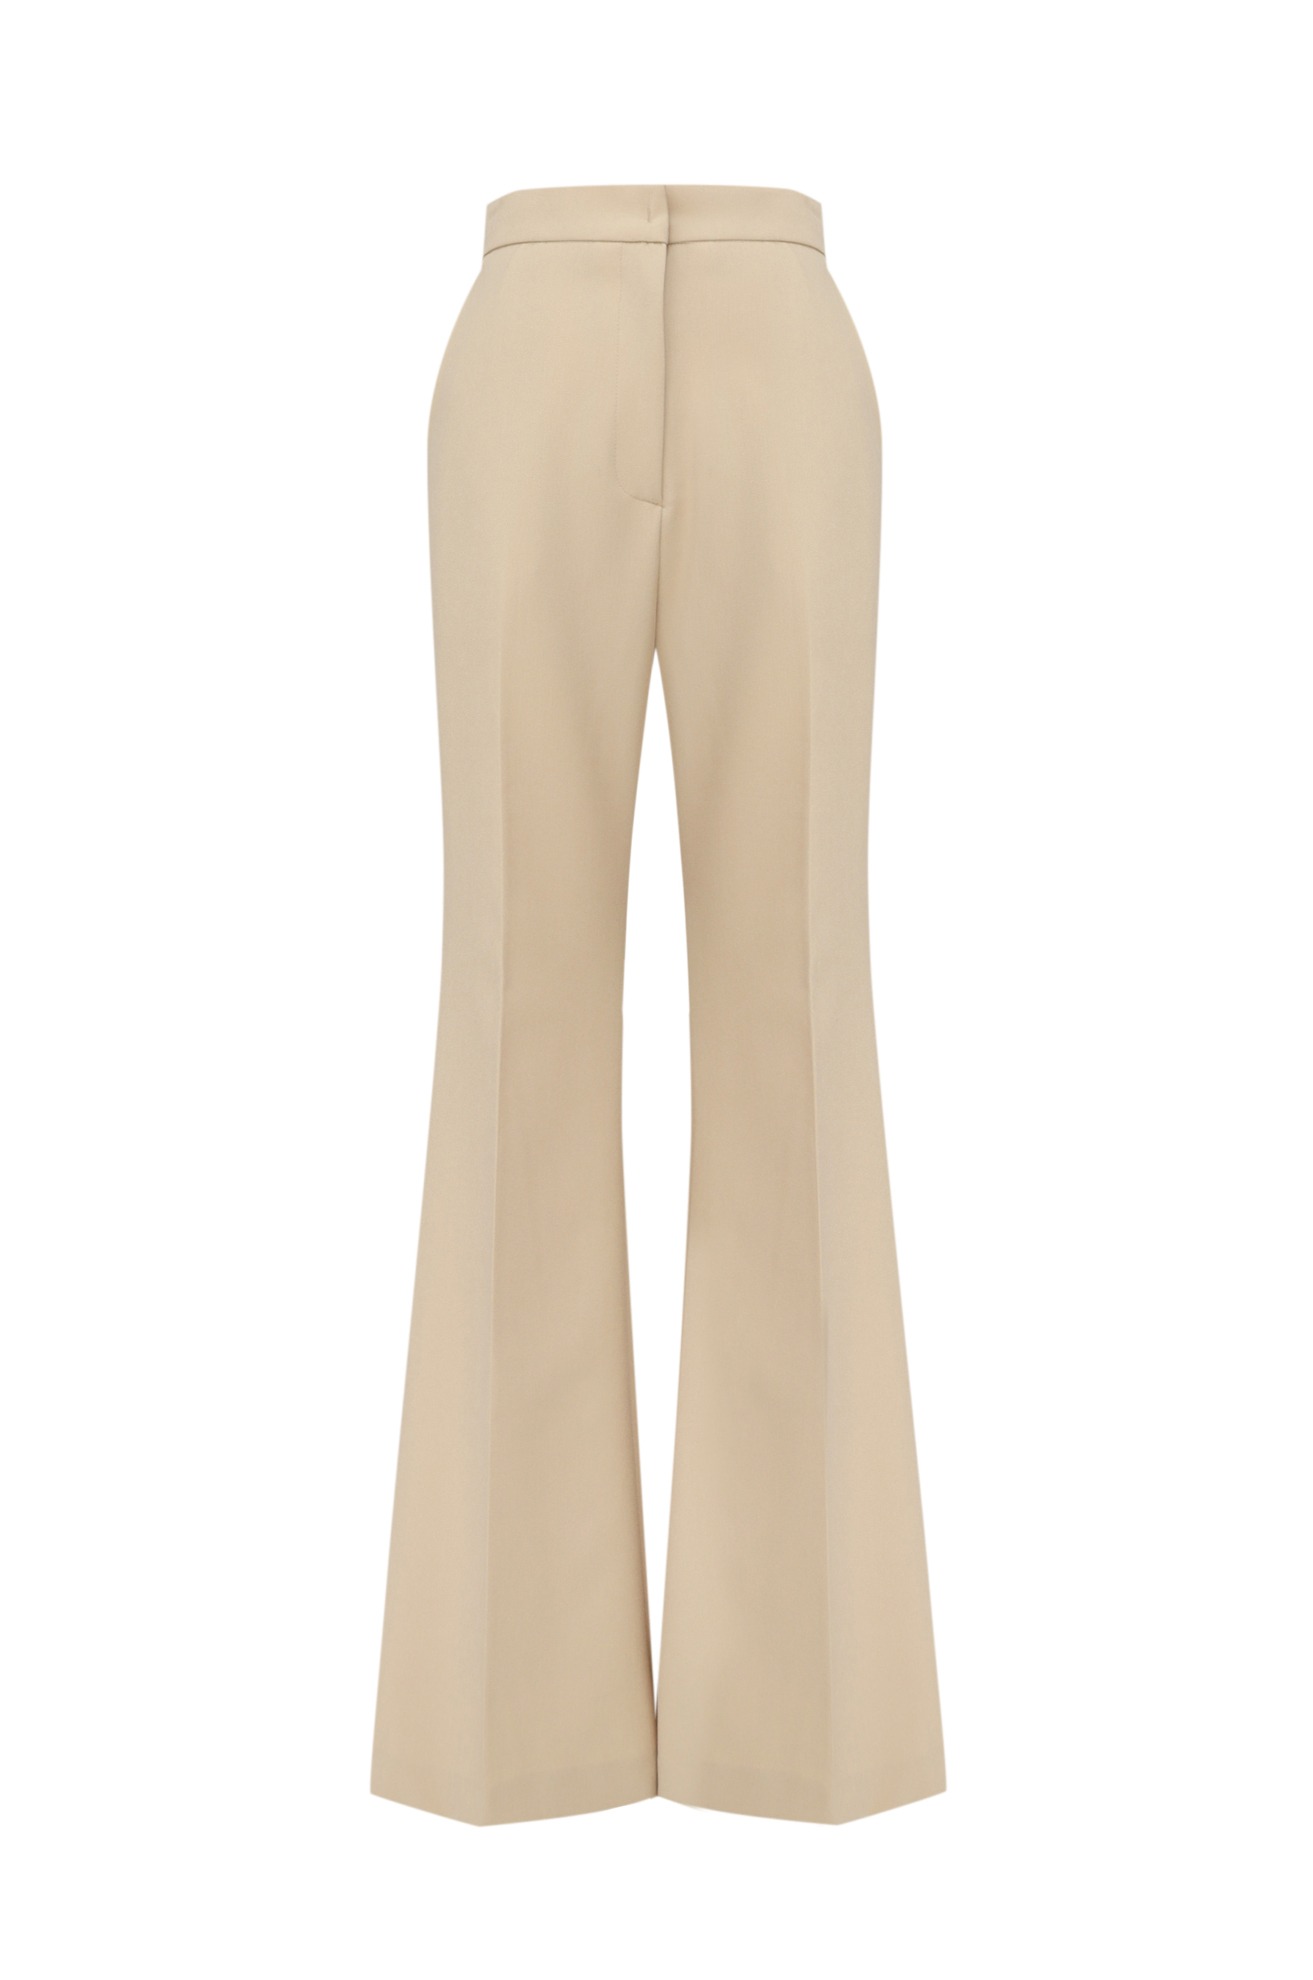 Formal Bootscut Trousers  6/12 순차발송